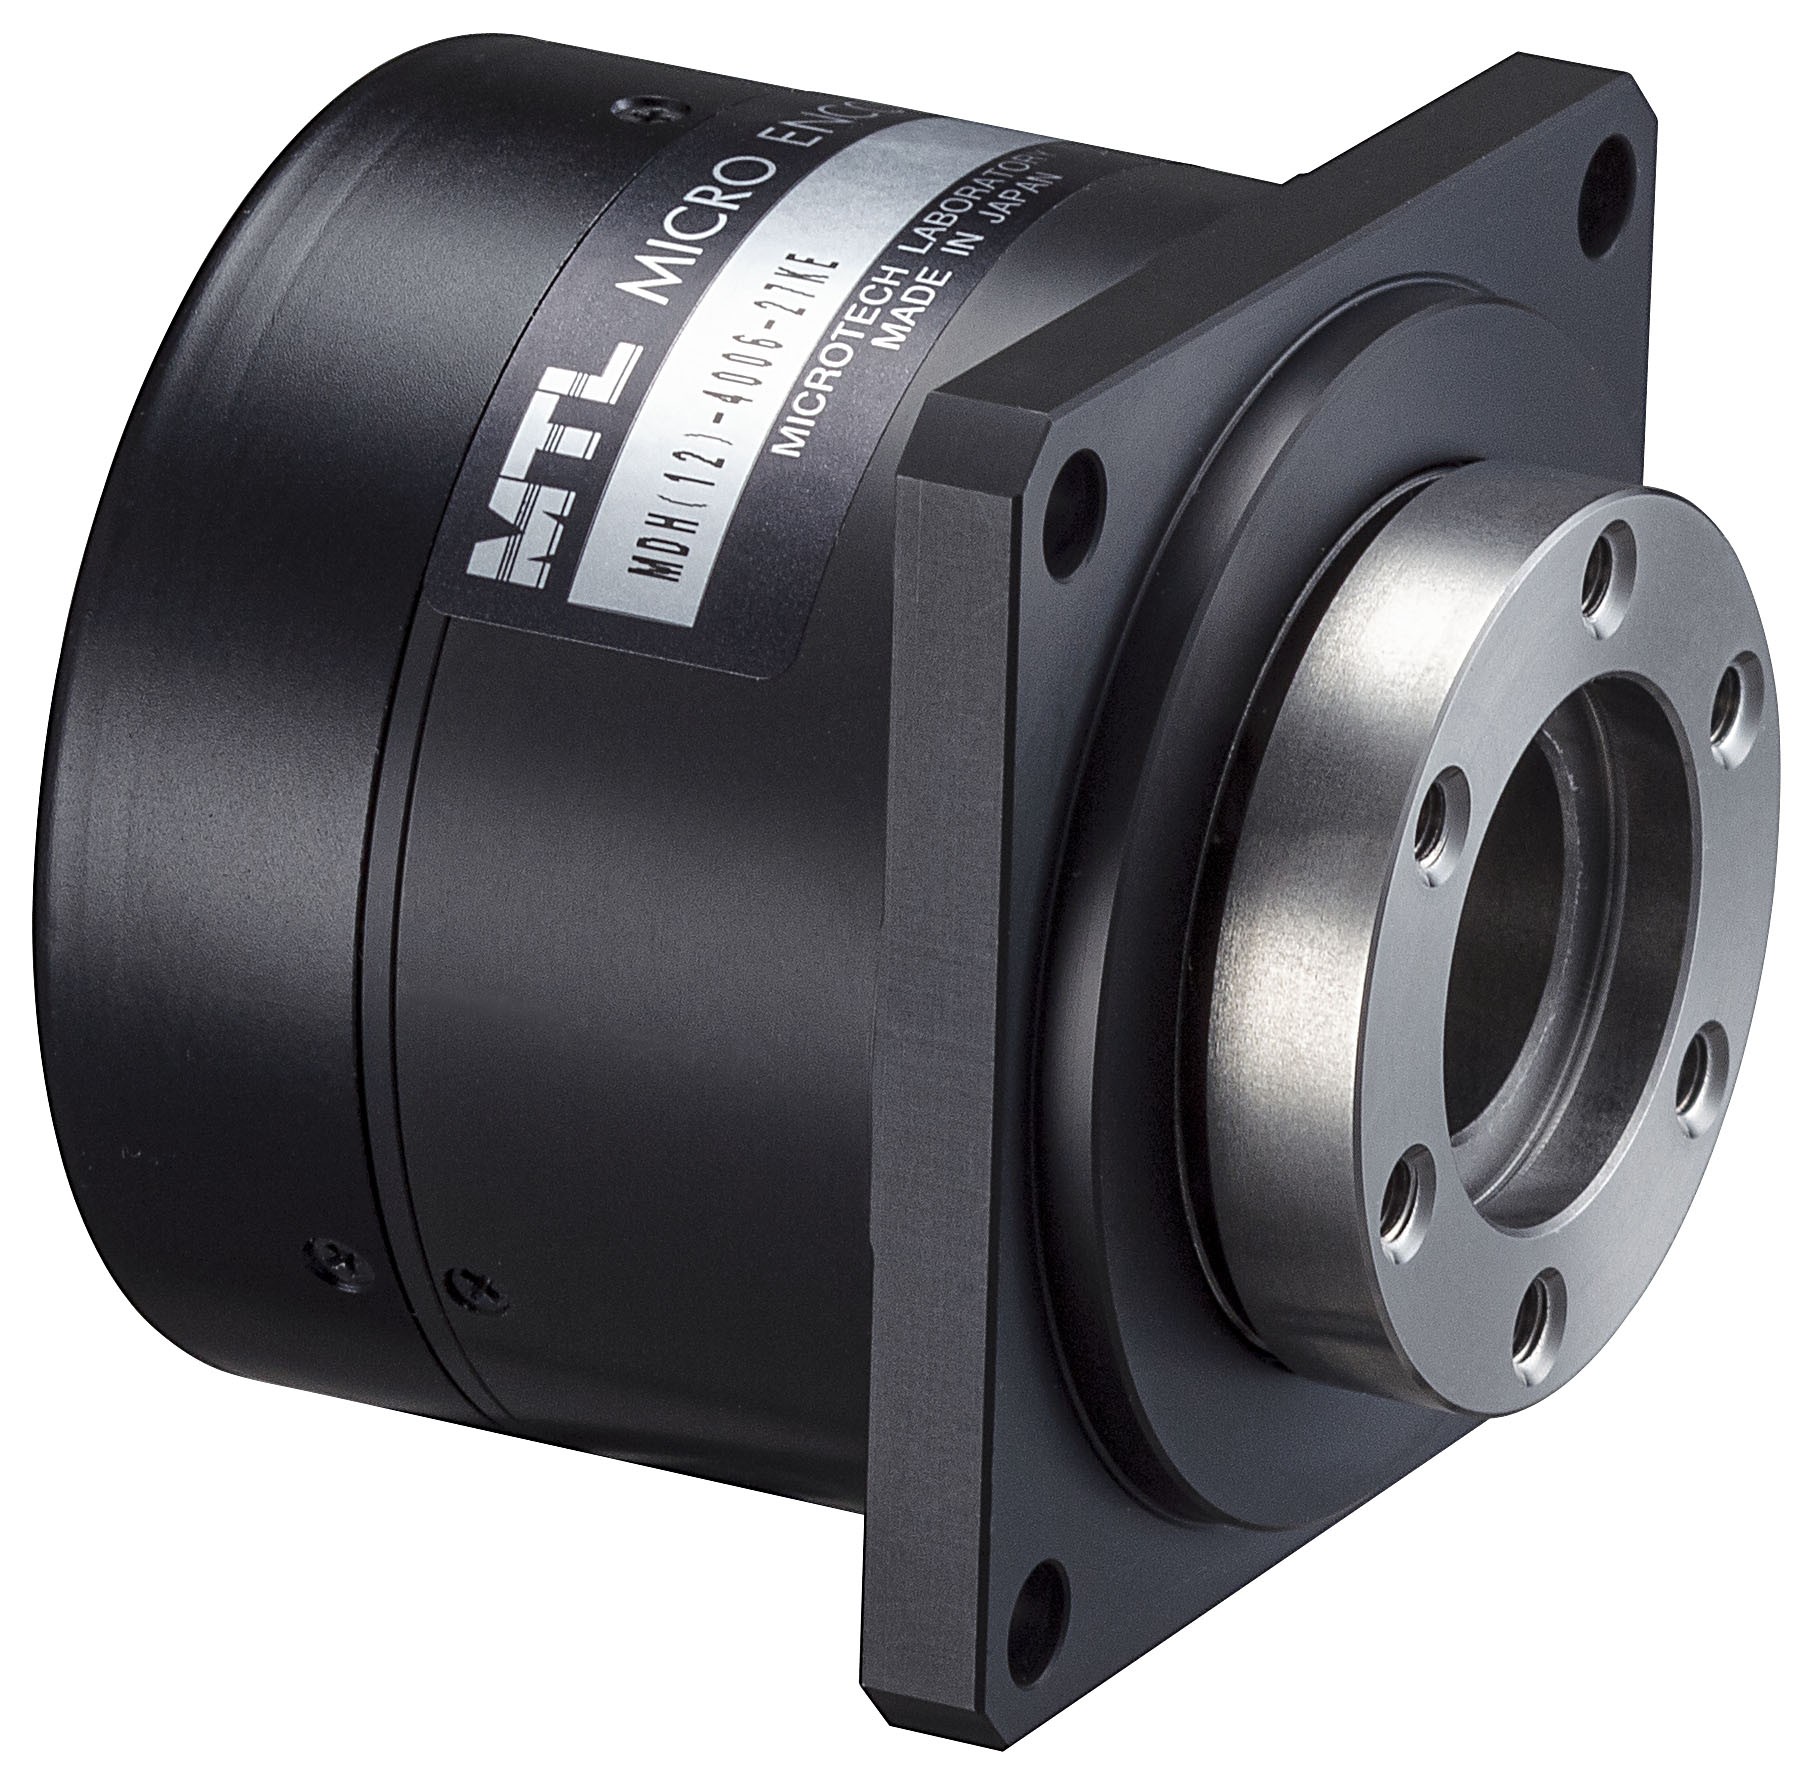 Nippon Pulse 40mm rotary servomotor with hollow shaft